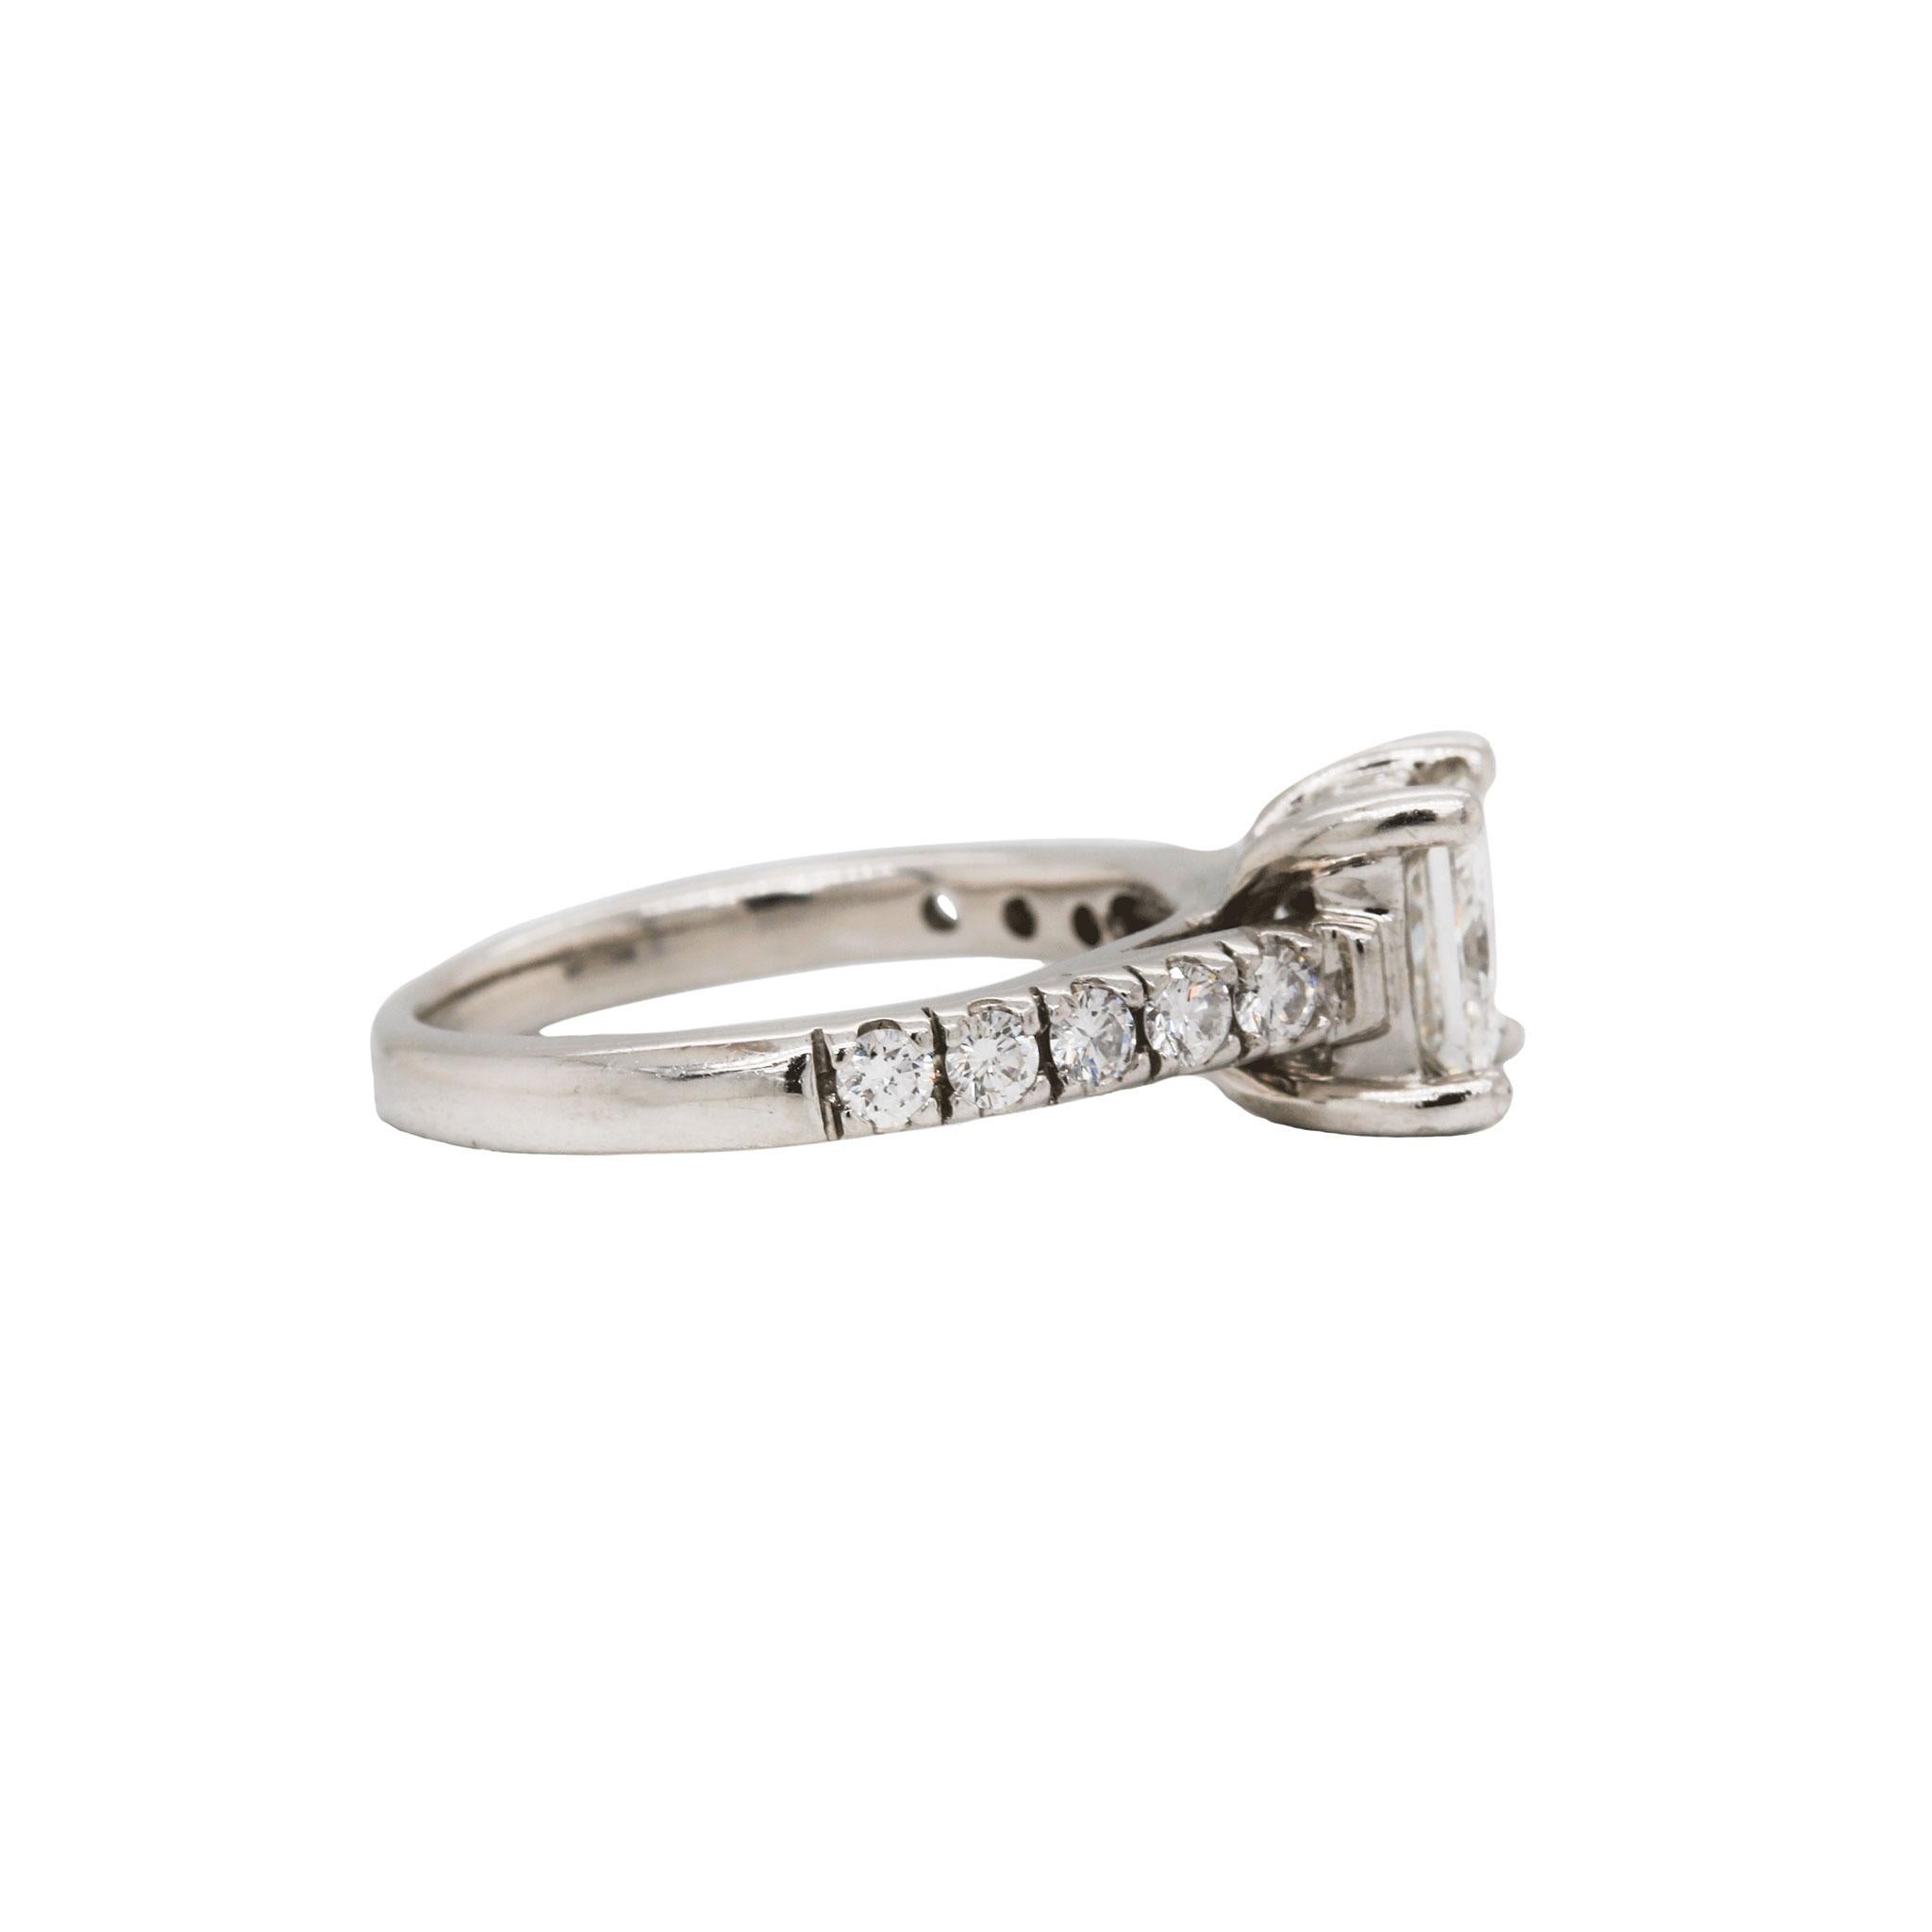 Princess Cut Diamond & Platinum Engagement Ring In Excellent Condition For Sale In Seattle, WA